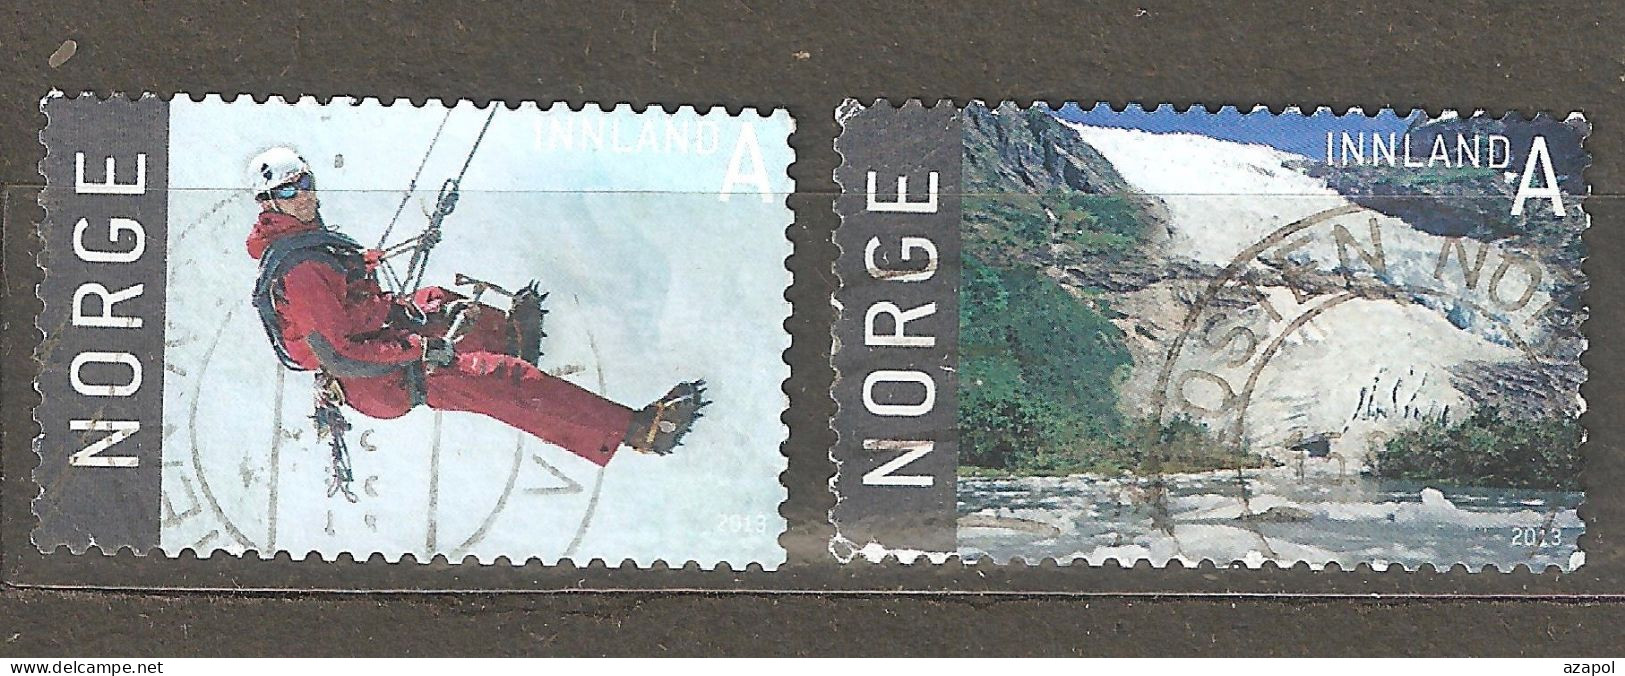 Norway: 2 Used Stamps From A Set, Tourism-a Climber On A Gletcher, Waterfall, 2013, Mi#1809-10 - Oblitérés